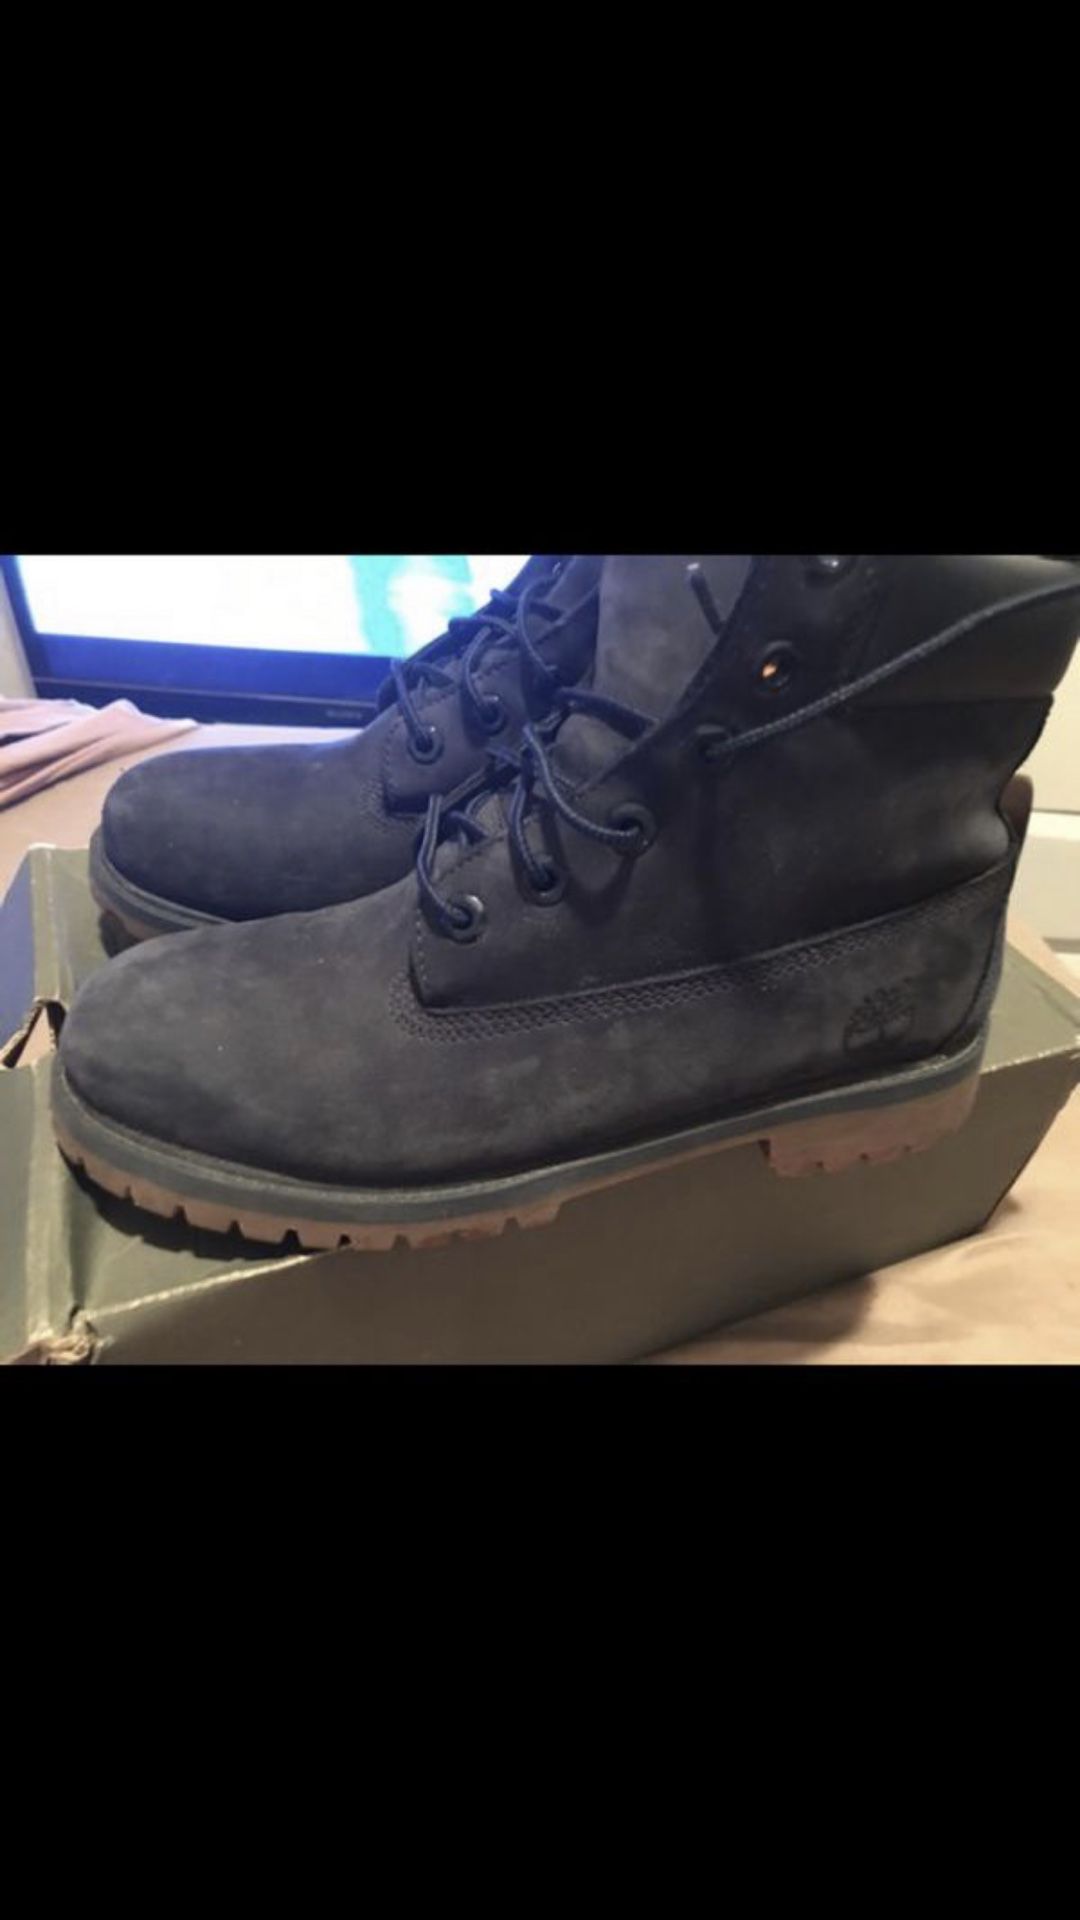 Timberland boots size 7 in great condition color dark blue